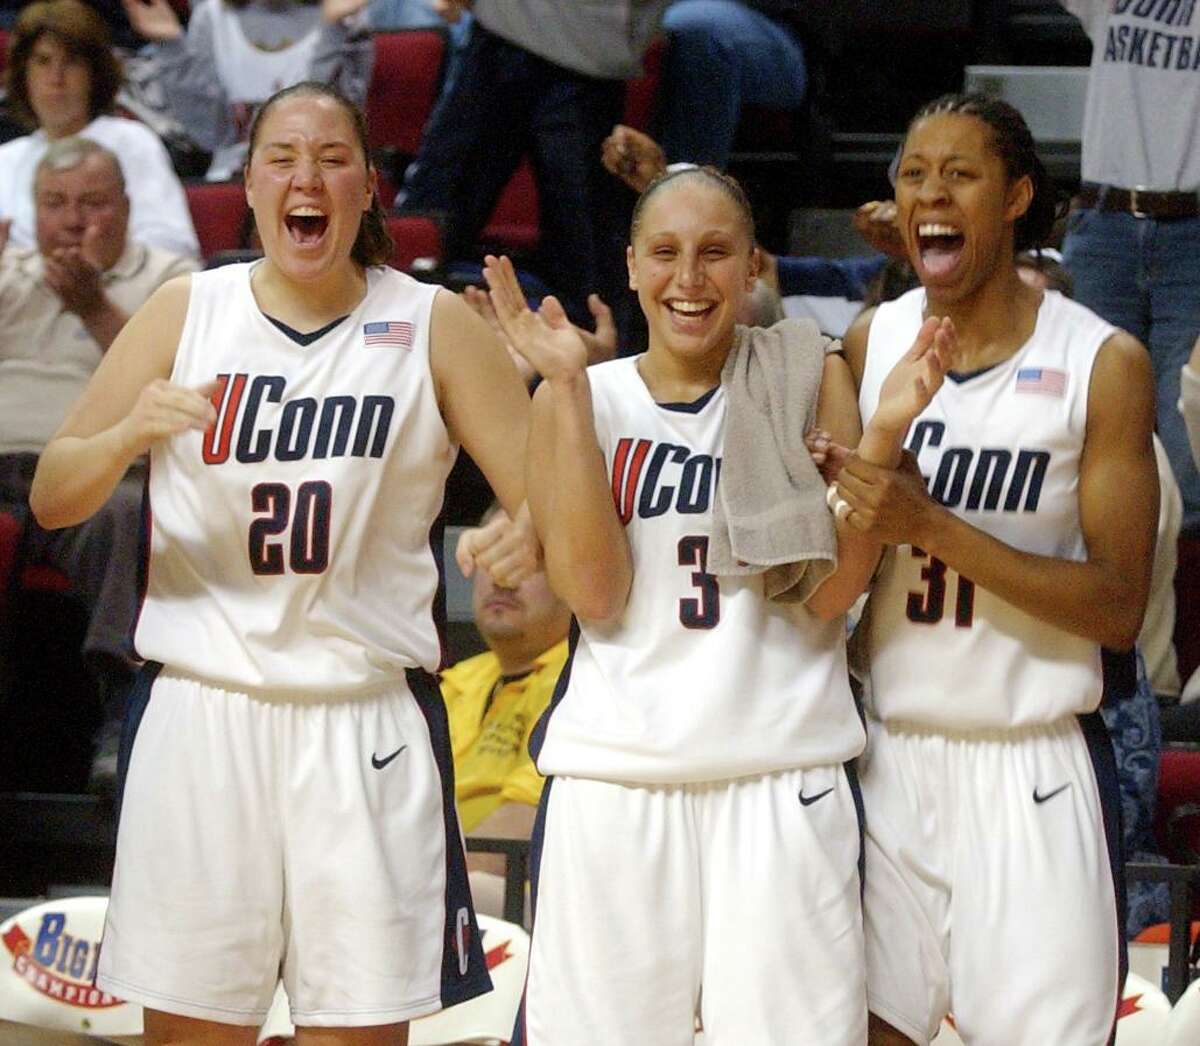 UConn's Morgan Valley (20) reacts from the bench with teammates during a game in 2003.